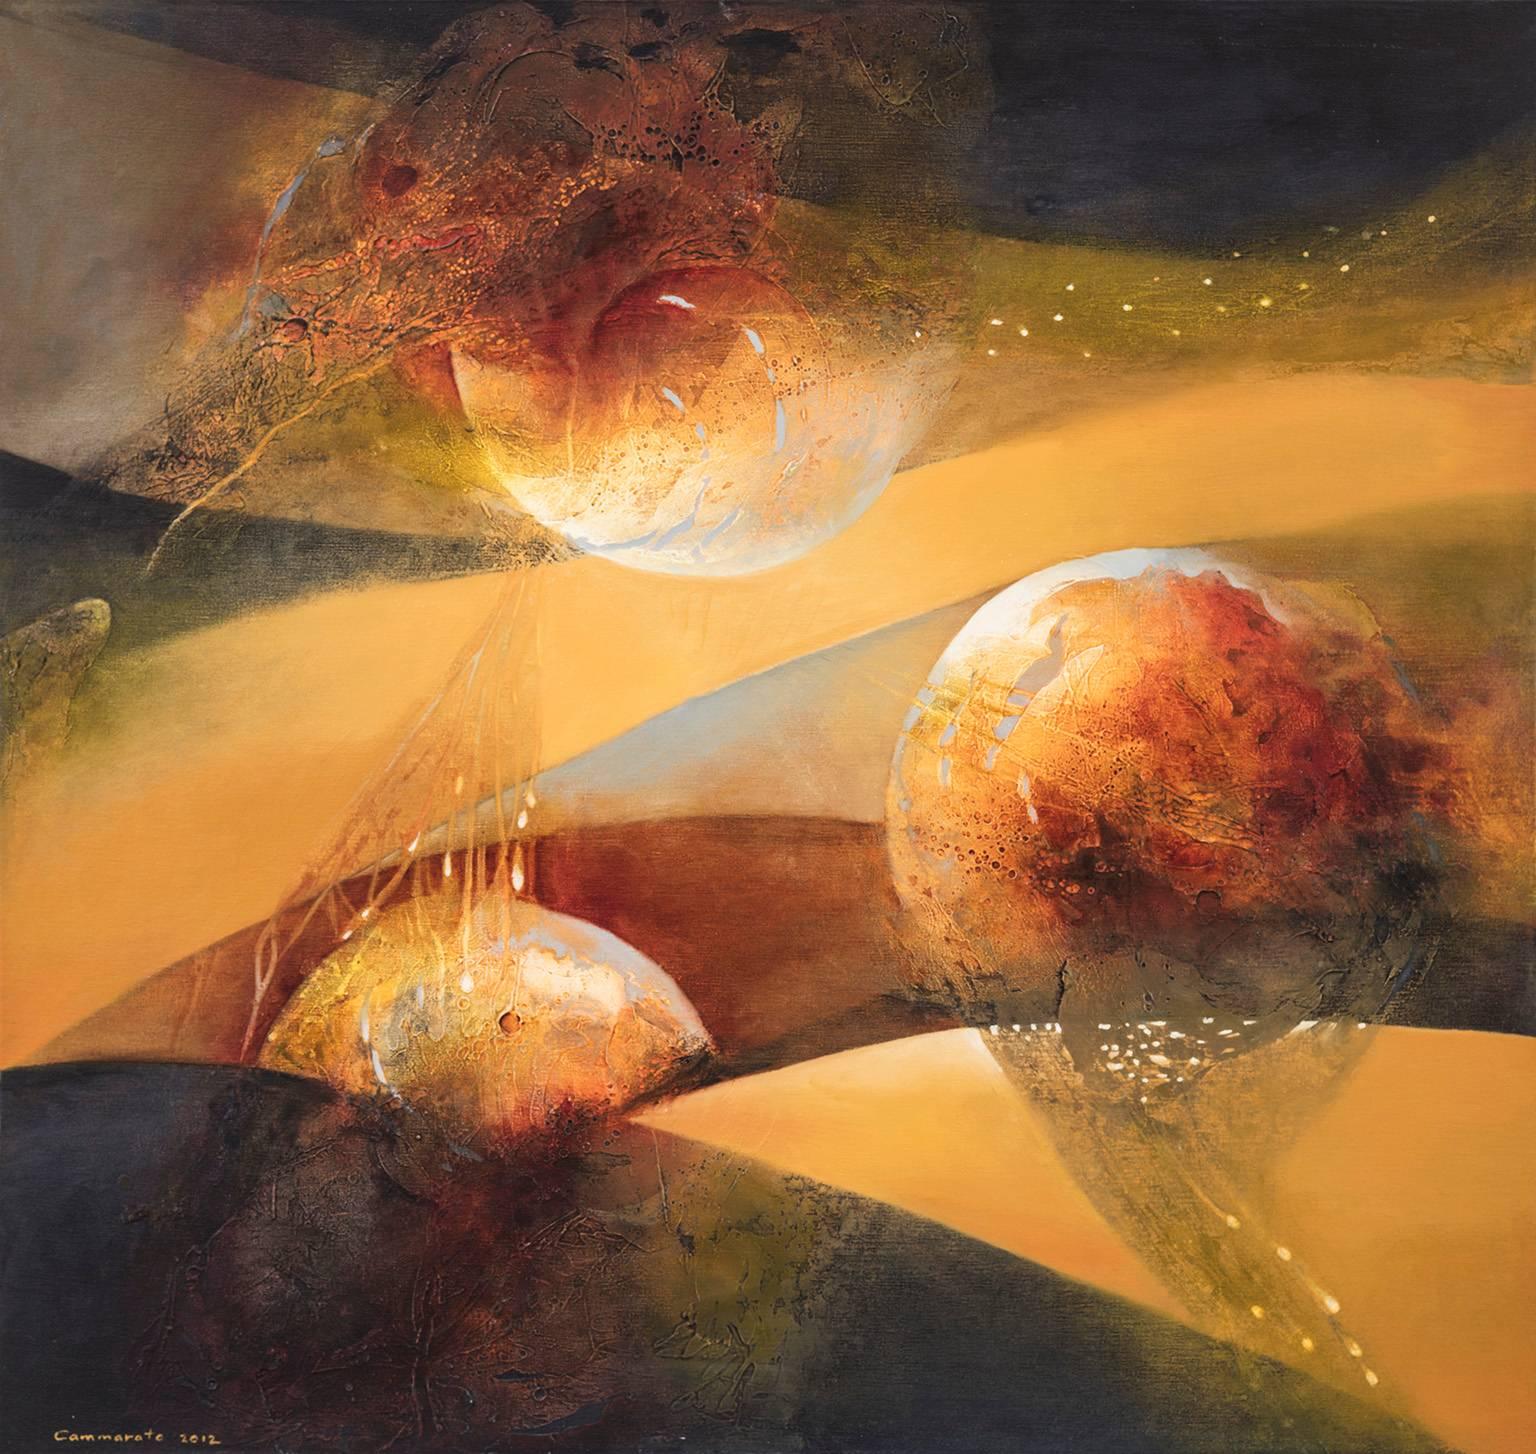 Abstract Painting Kathleen Cammarata - Sisters of Astral Lights - Peinture abstraite Orange Siena - formes planétaires